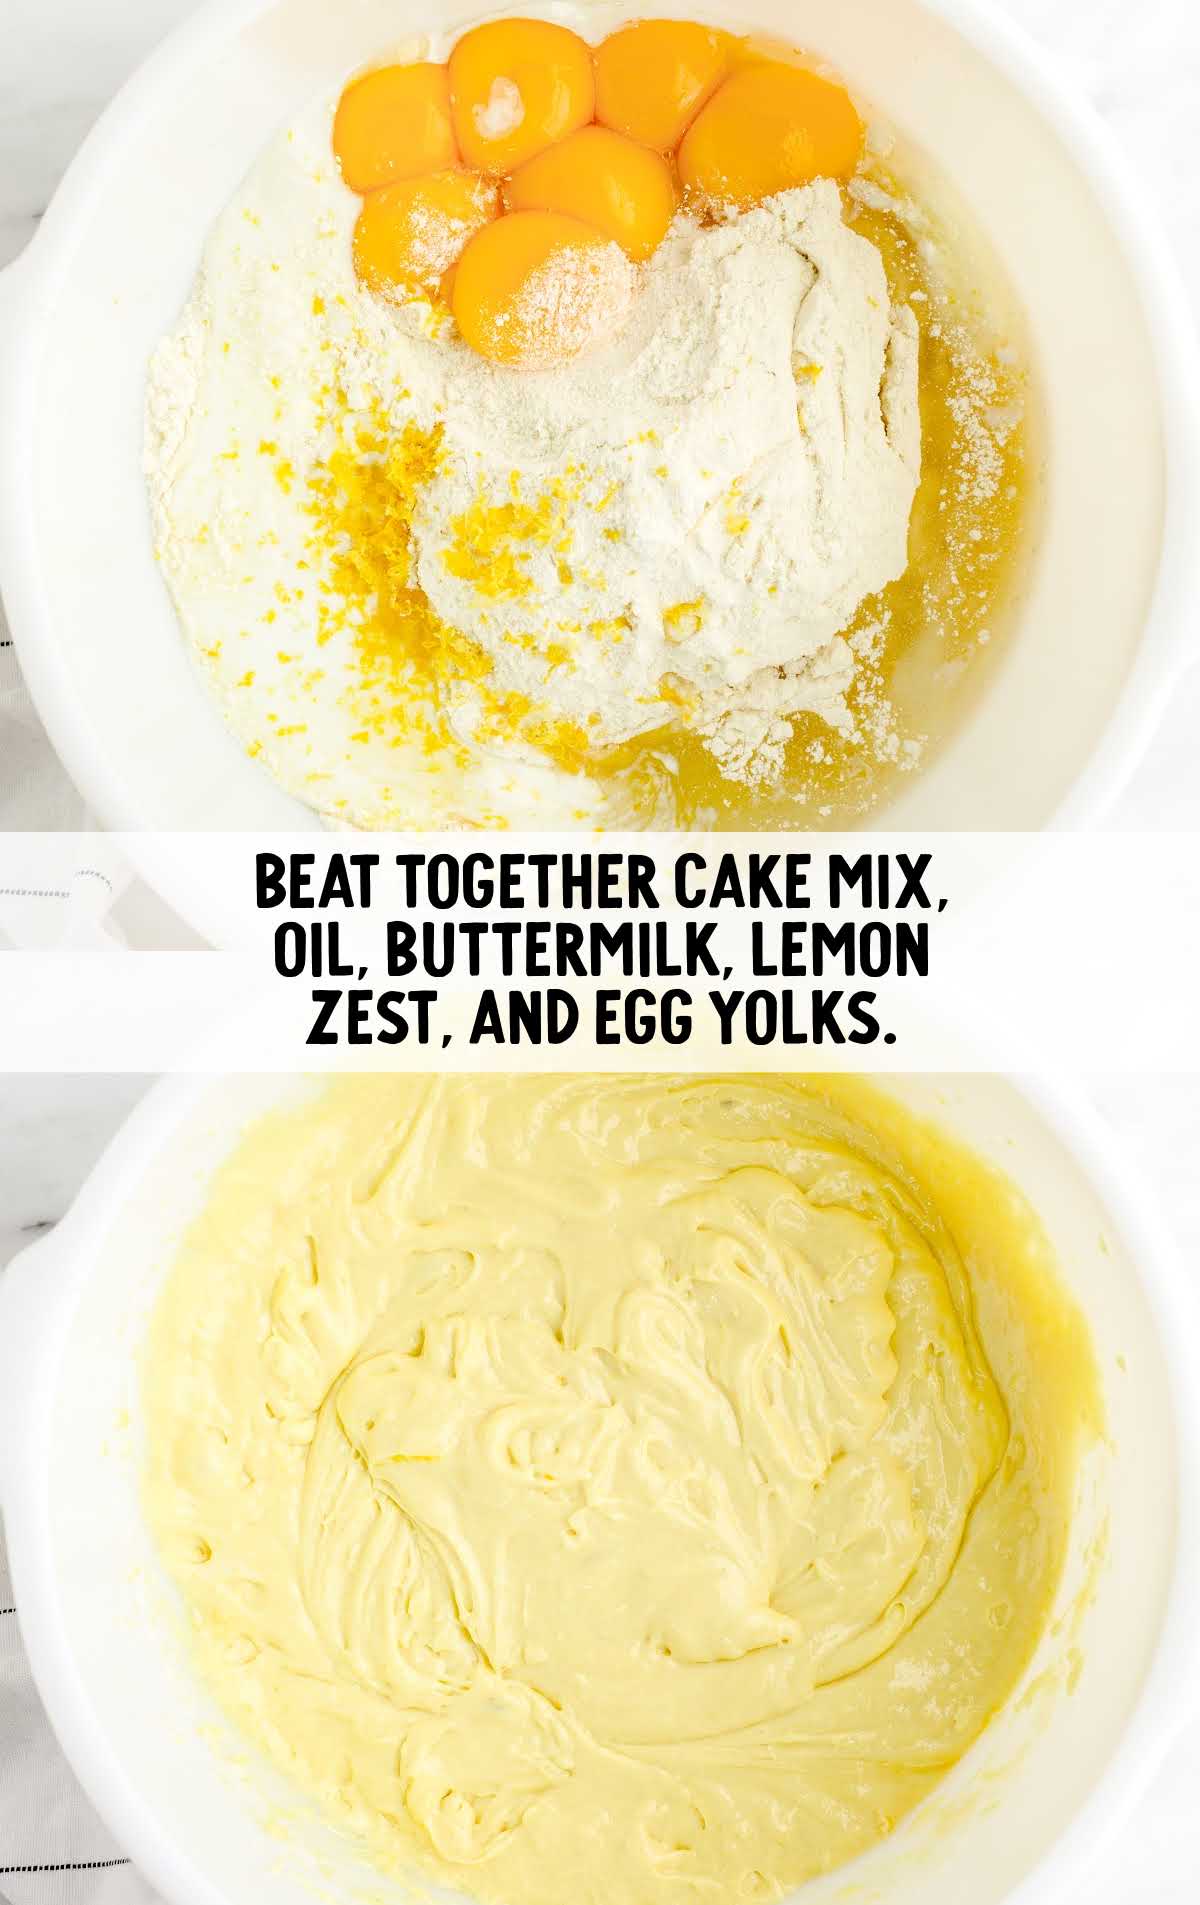 cake mix, oil, buttermilk, lemon zest, and egg yolk being whisked together in a bowl